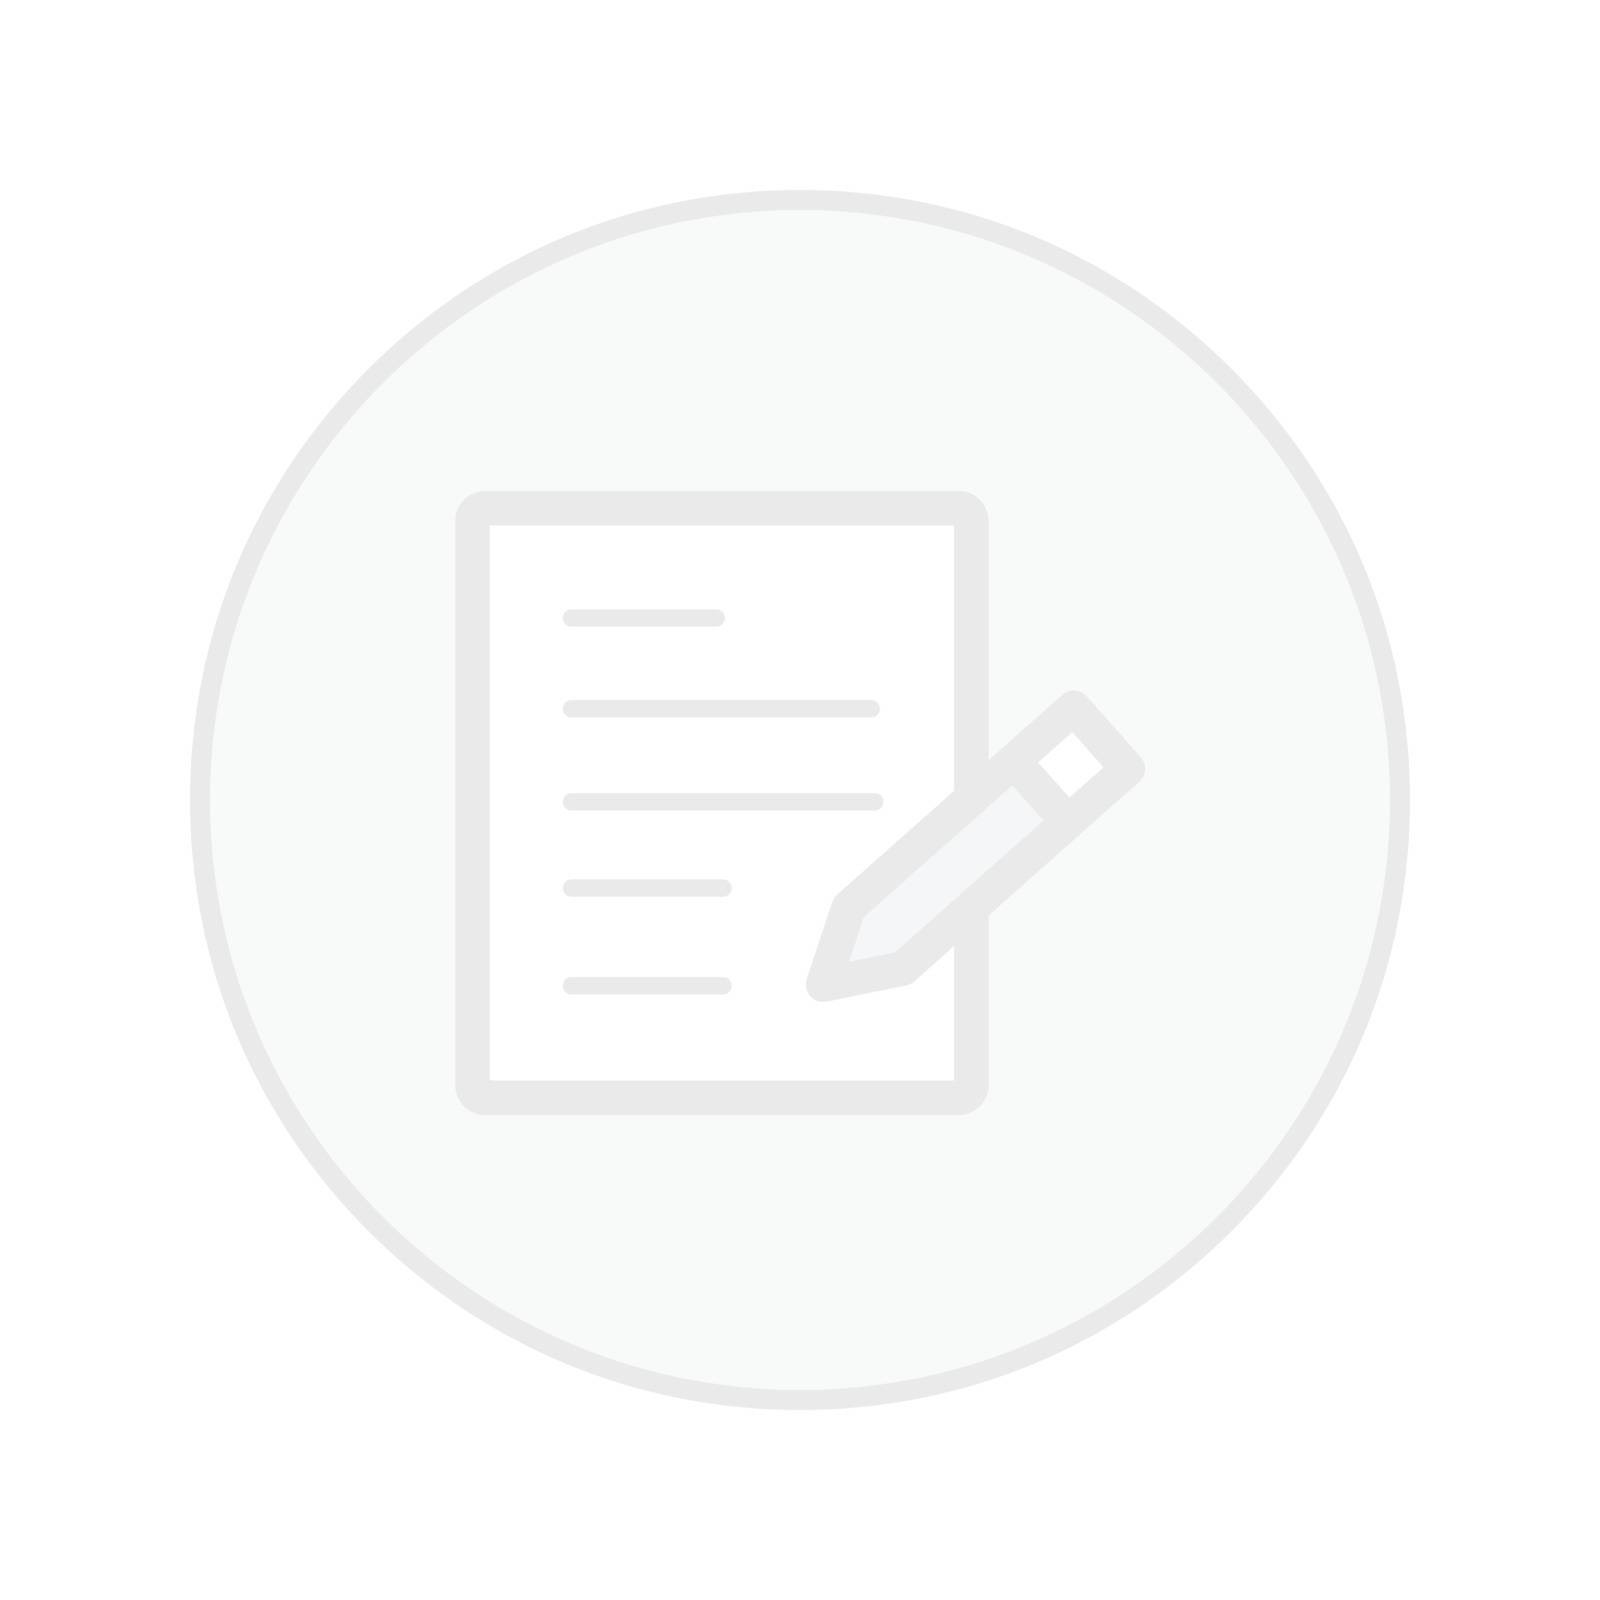 office paper with pencil  white button icon